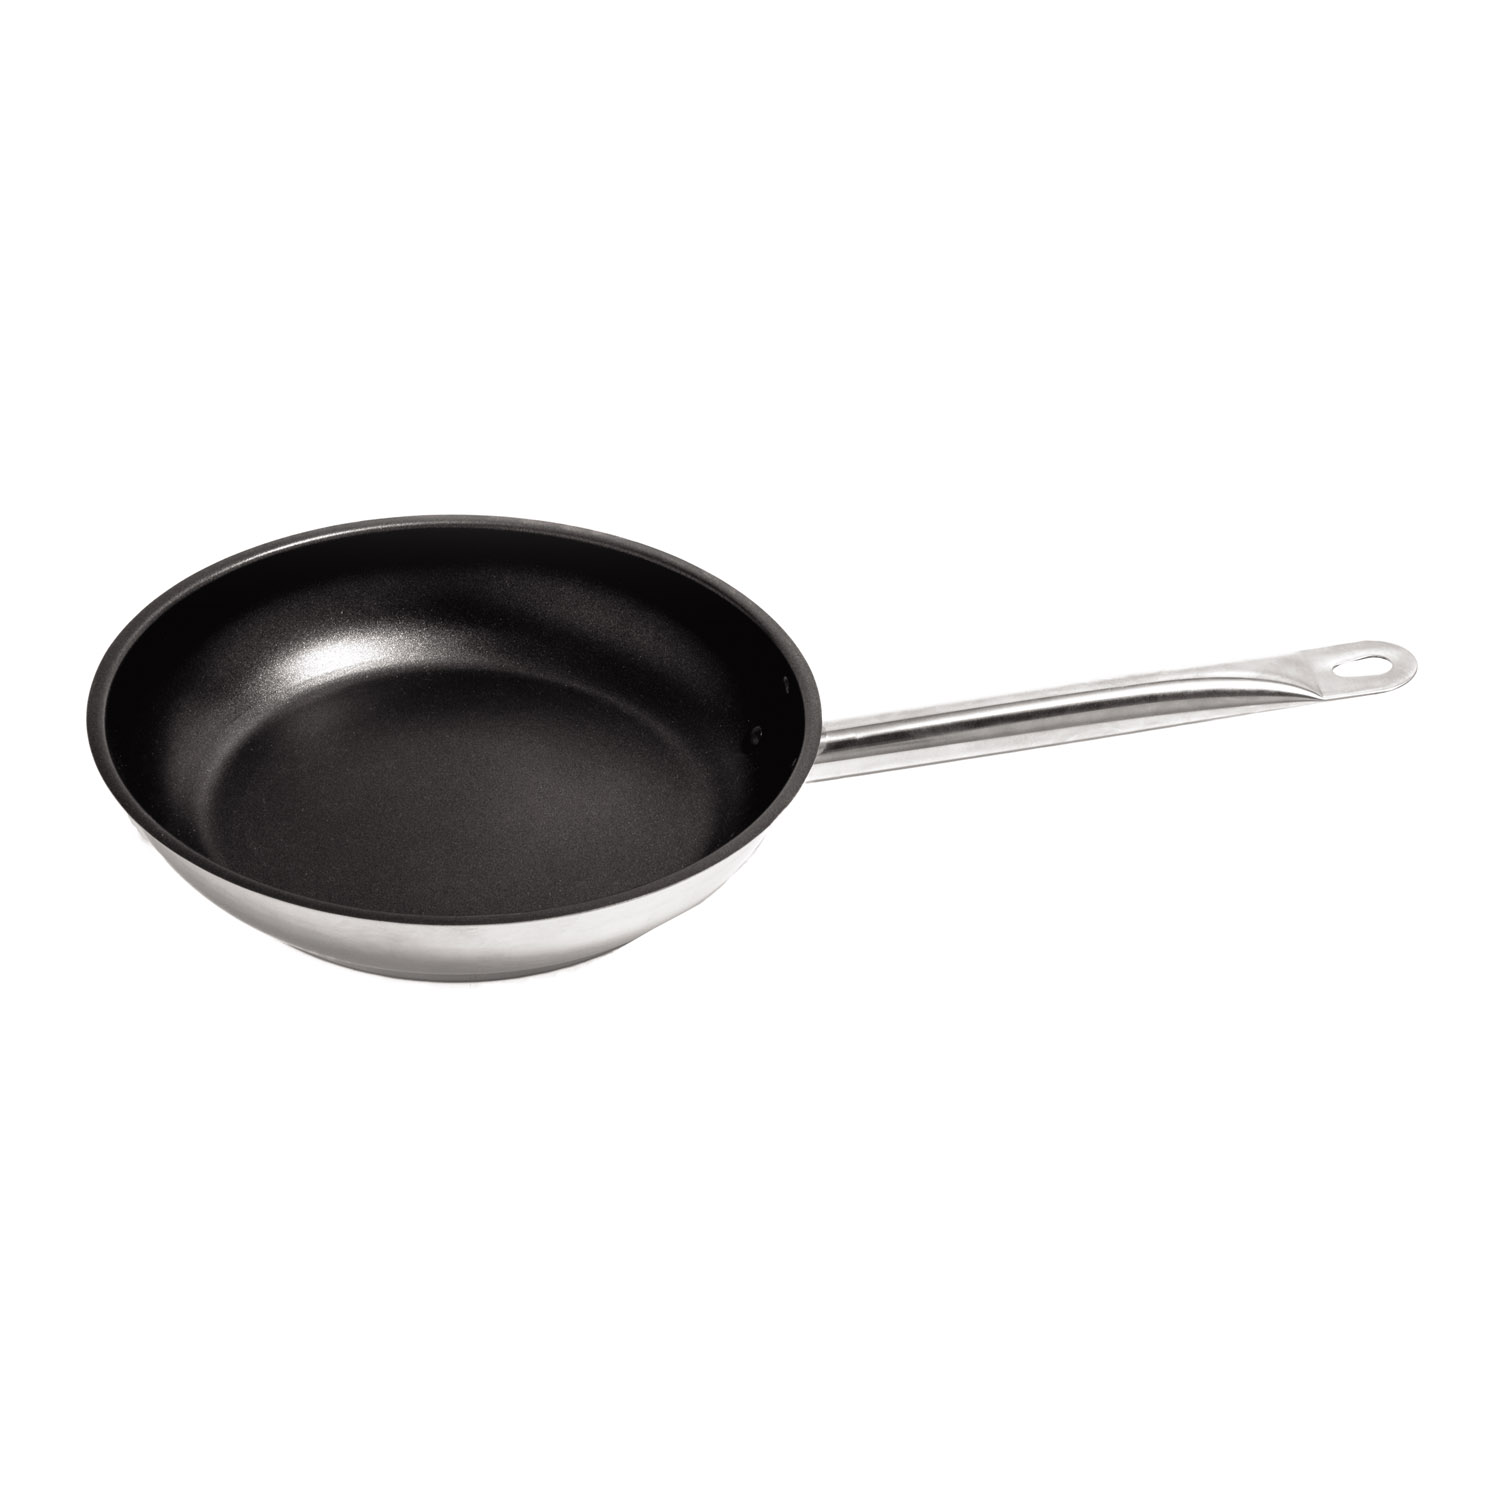 CAC China S2FP-9N Stainless Steel Non-Stick Fry Pan 9-1/2"